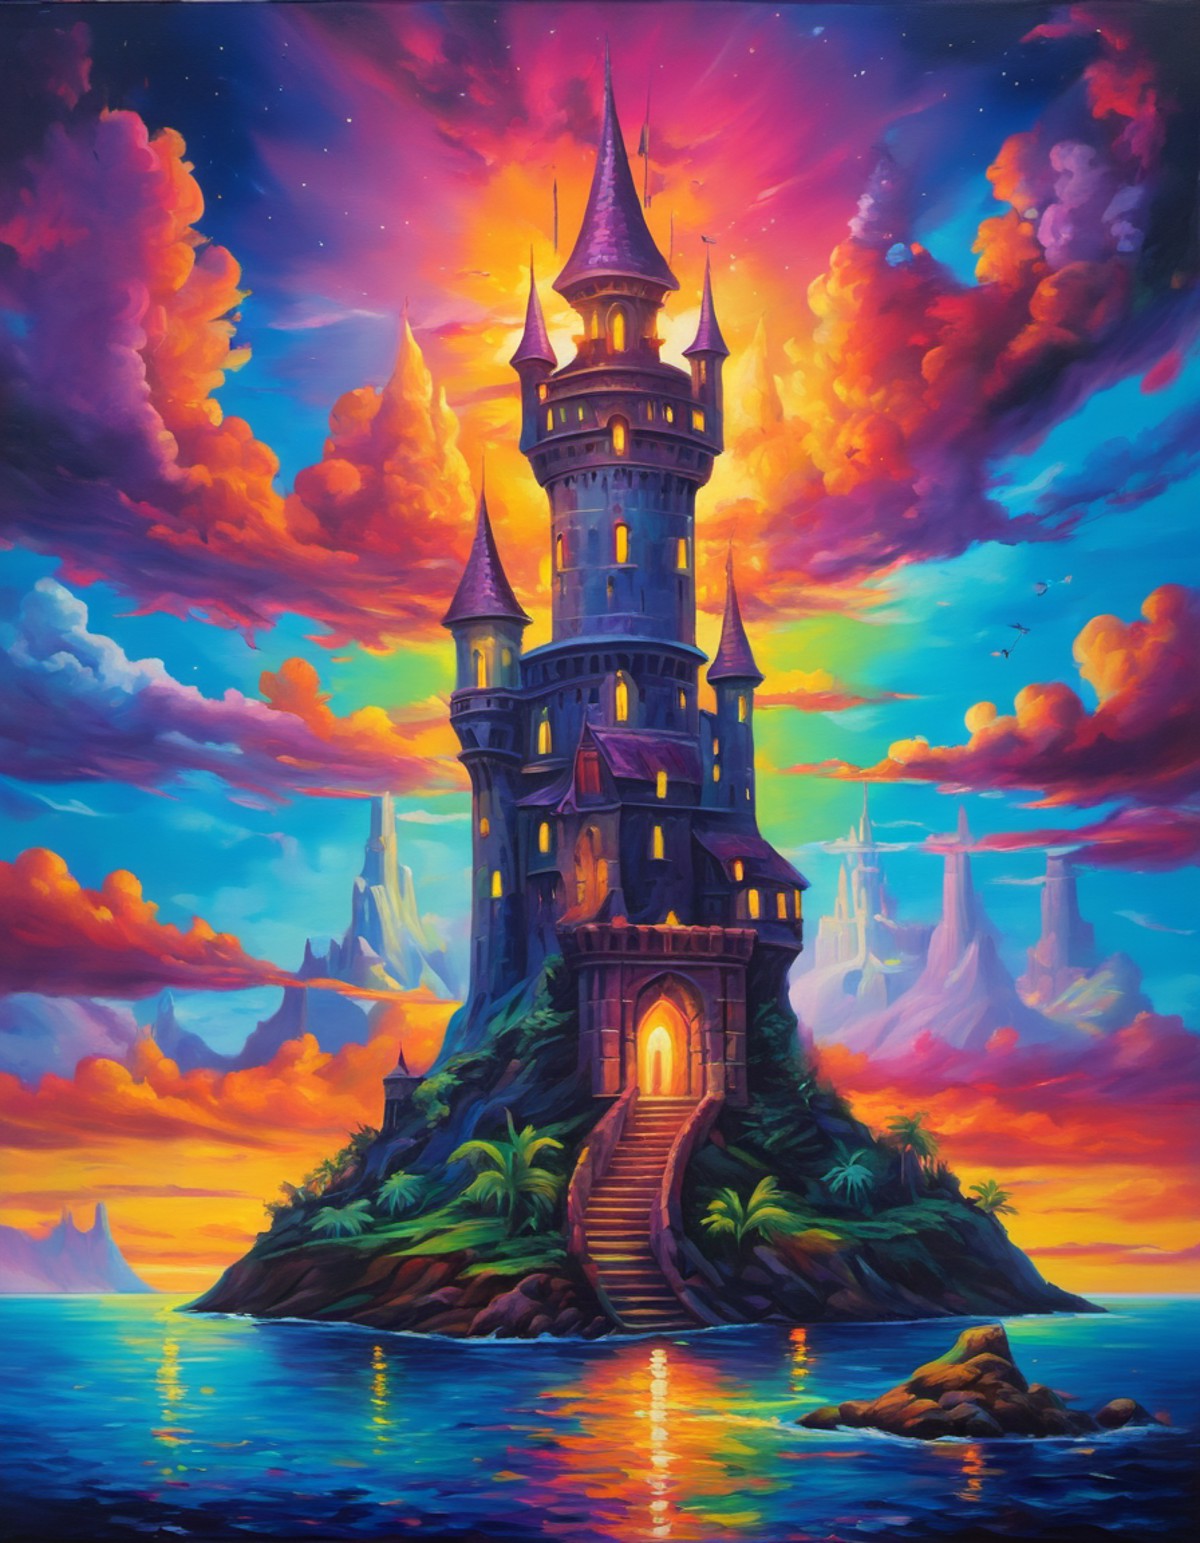 PsyAI, psychedelic painting of an epic wizards castle tower on an island in the ocean, (epic castle)+ spires, watchtowers ...